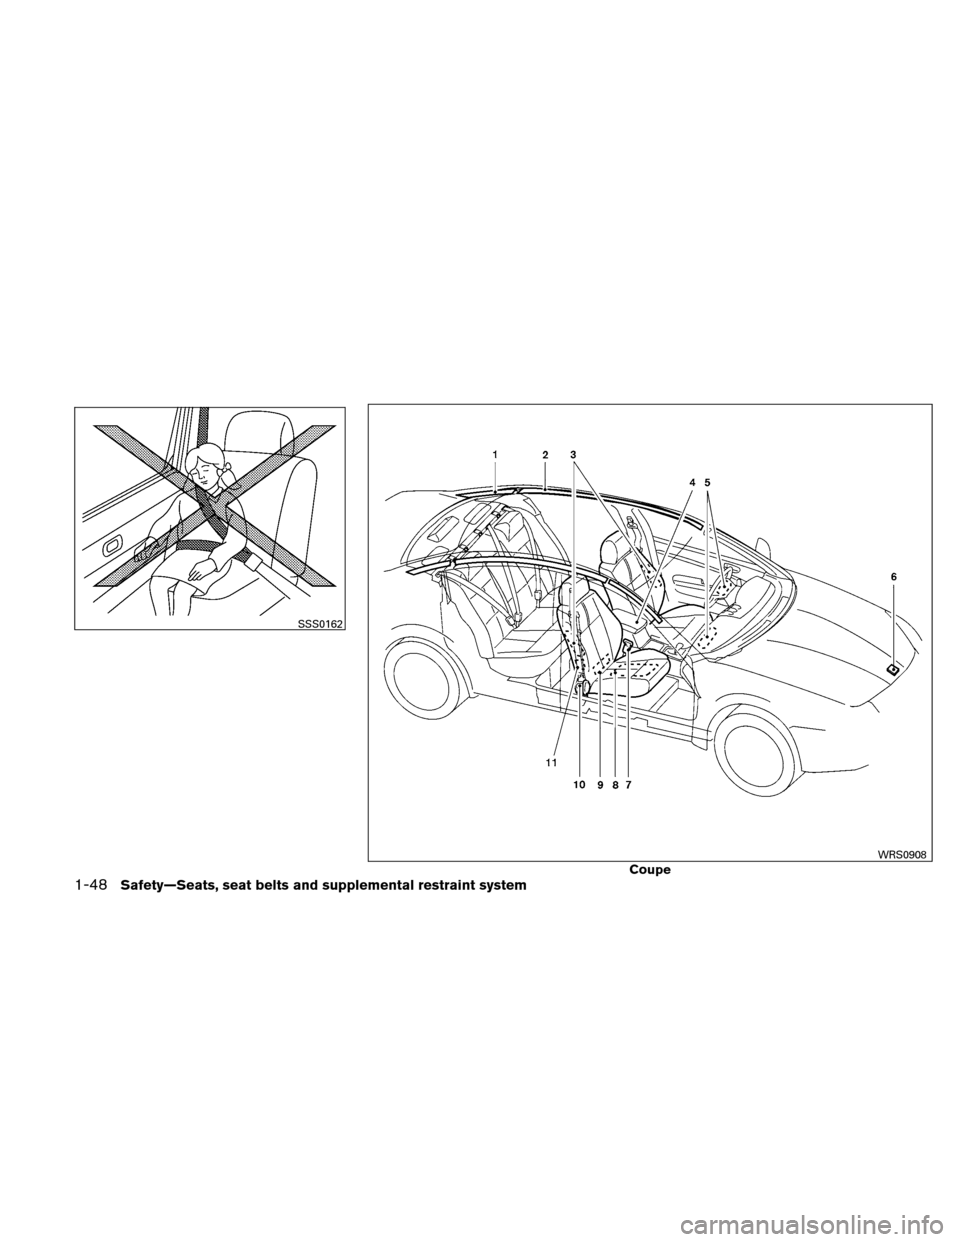 NISSAN ALTIMA COUPE 2010 D32 / 4.G Repair Manual SSS0162
CoupeWRS0908
1-48Safety—Seats, seat belts and supplemental restraint system 